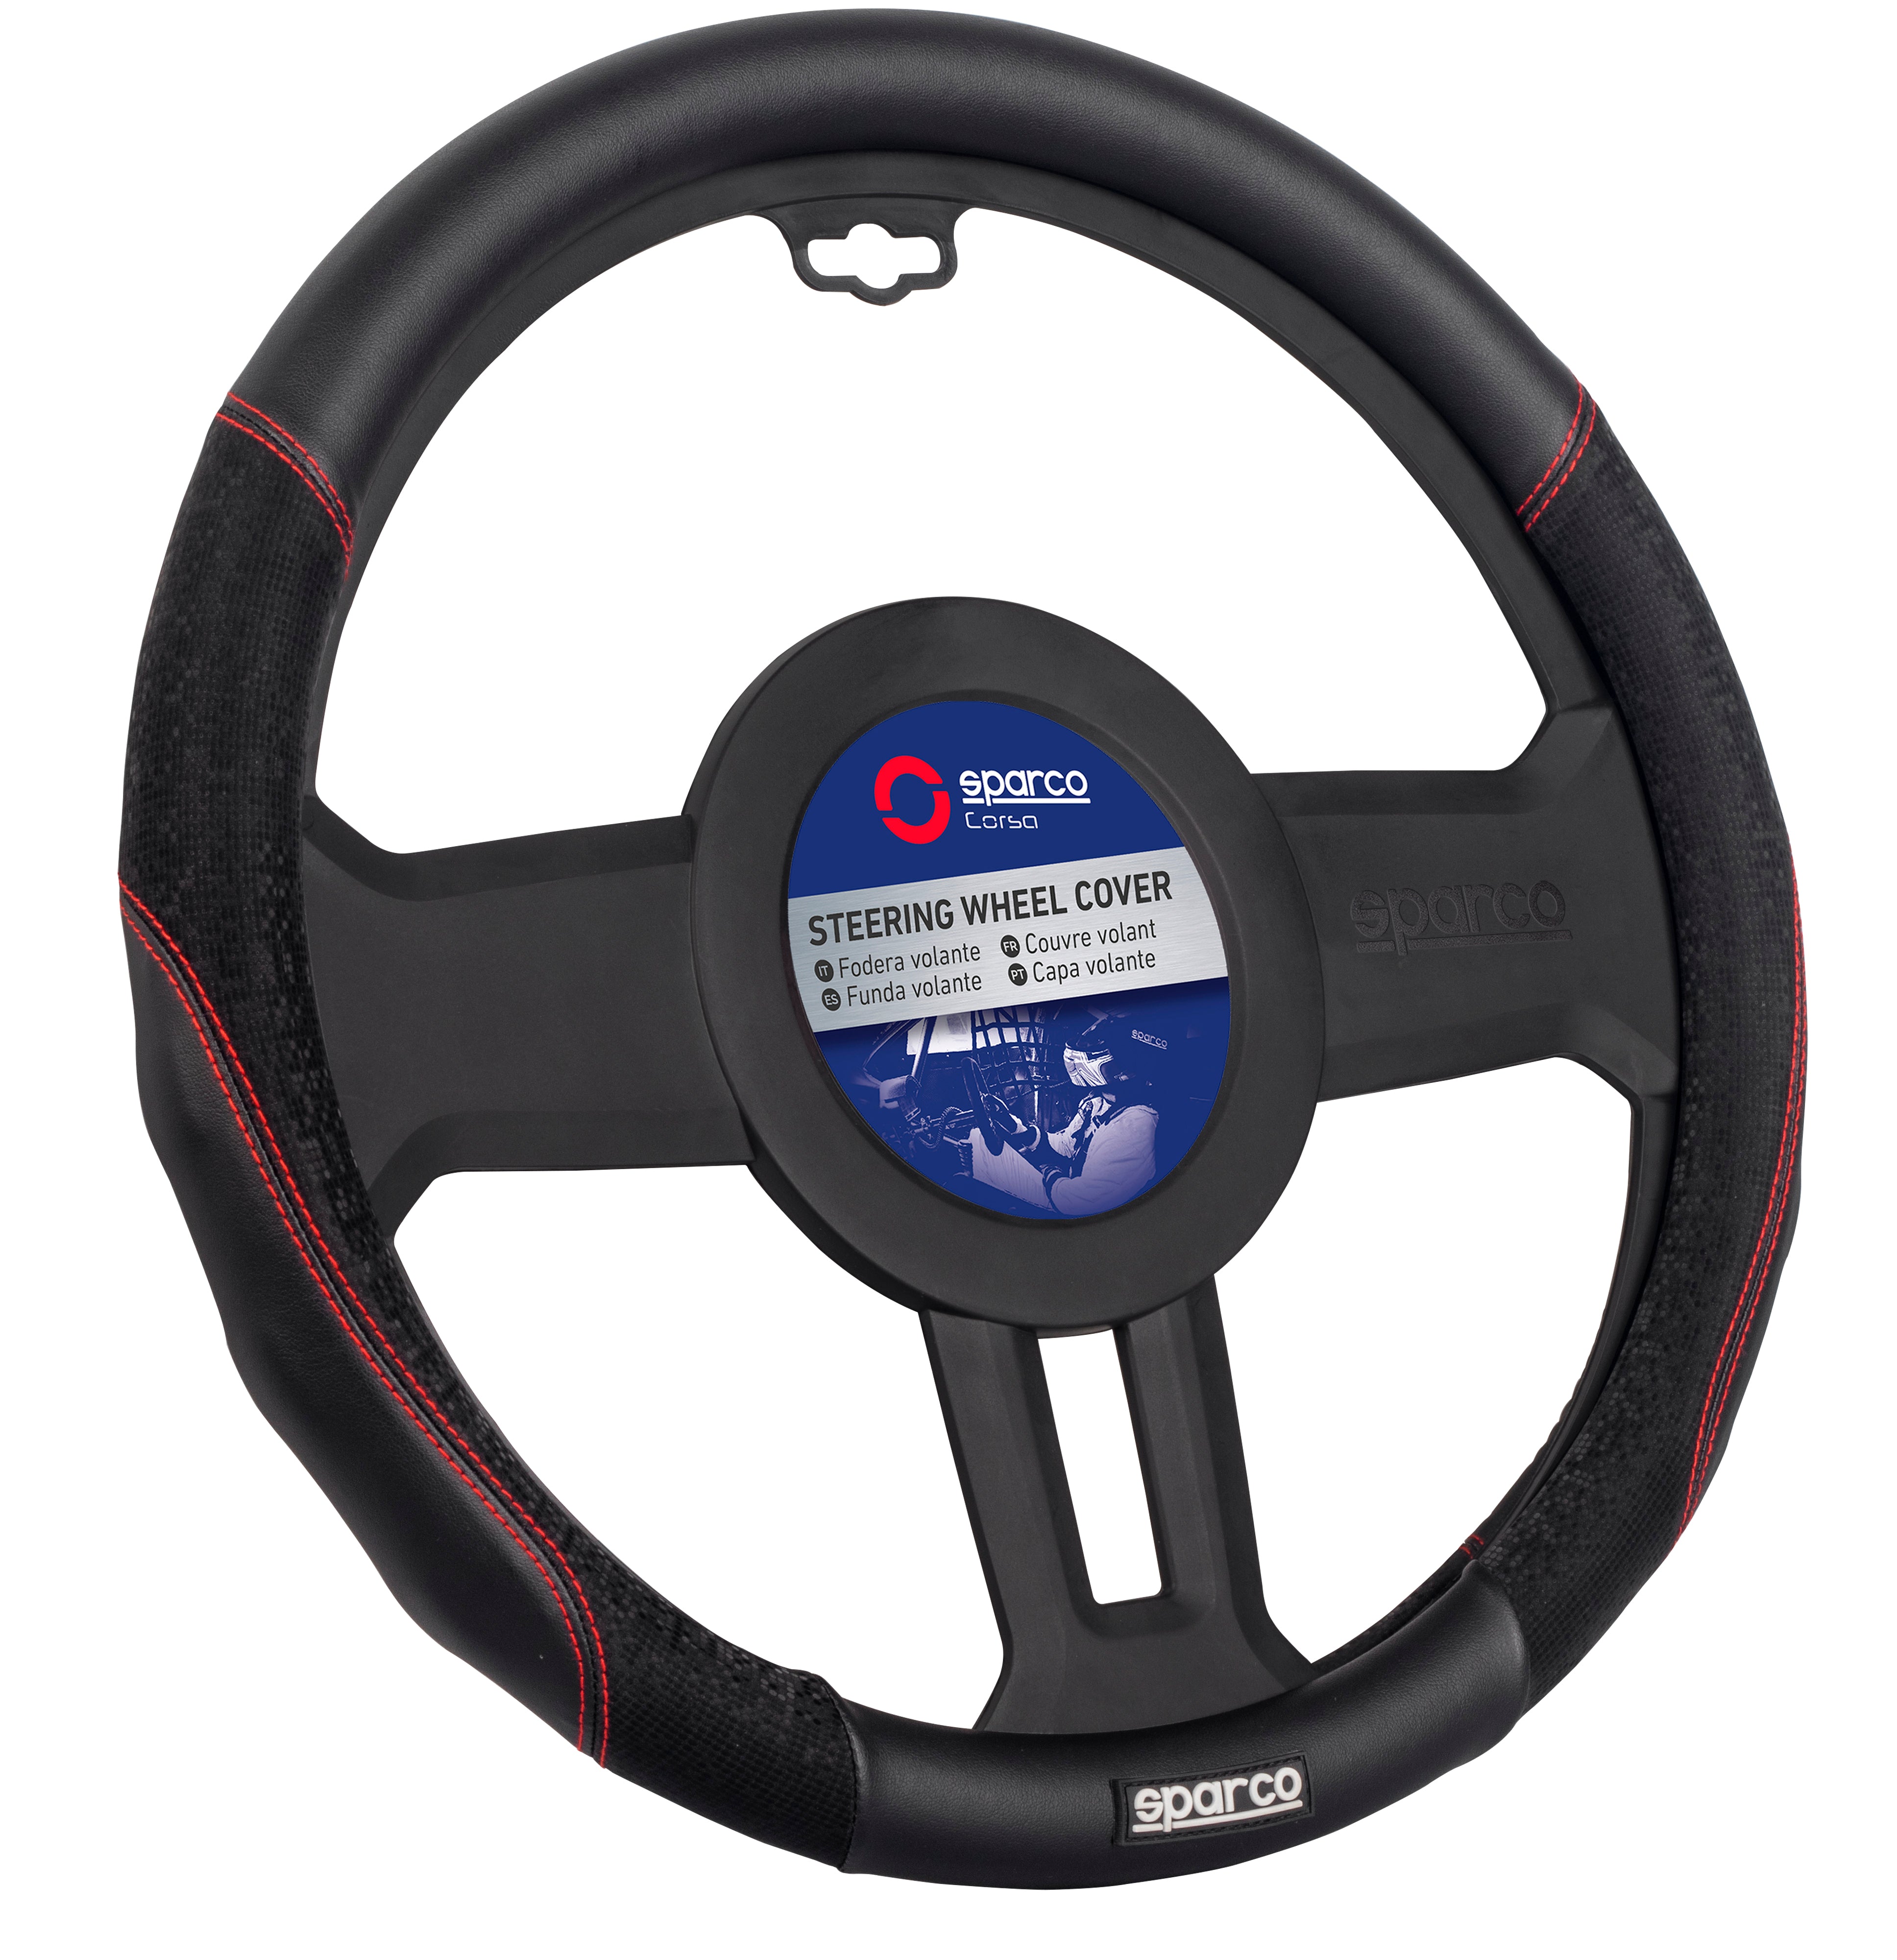 Sparco Steering Wheel Cover,Rubber Ring 38*8.2cm